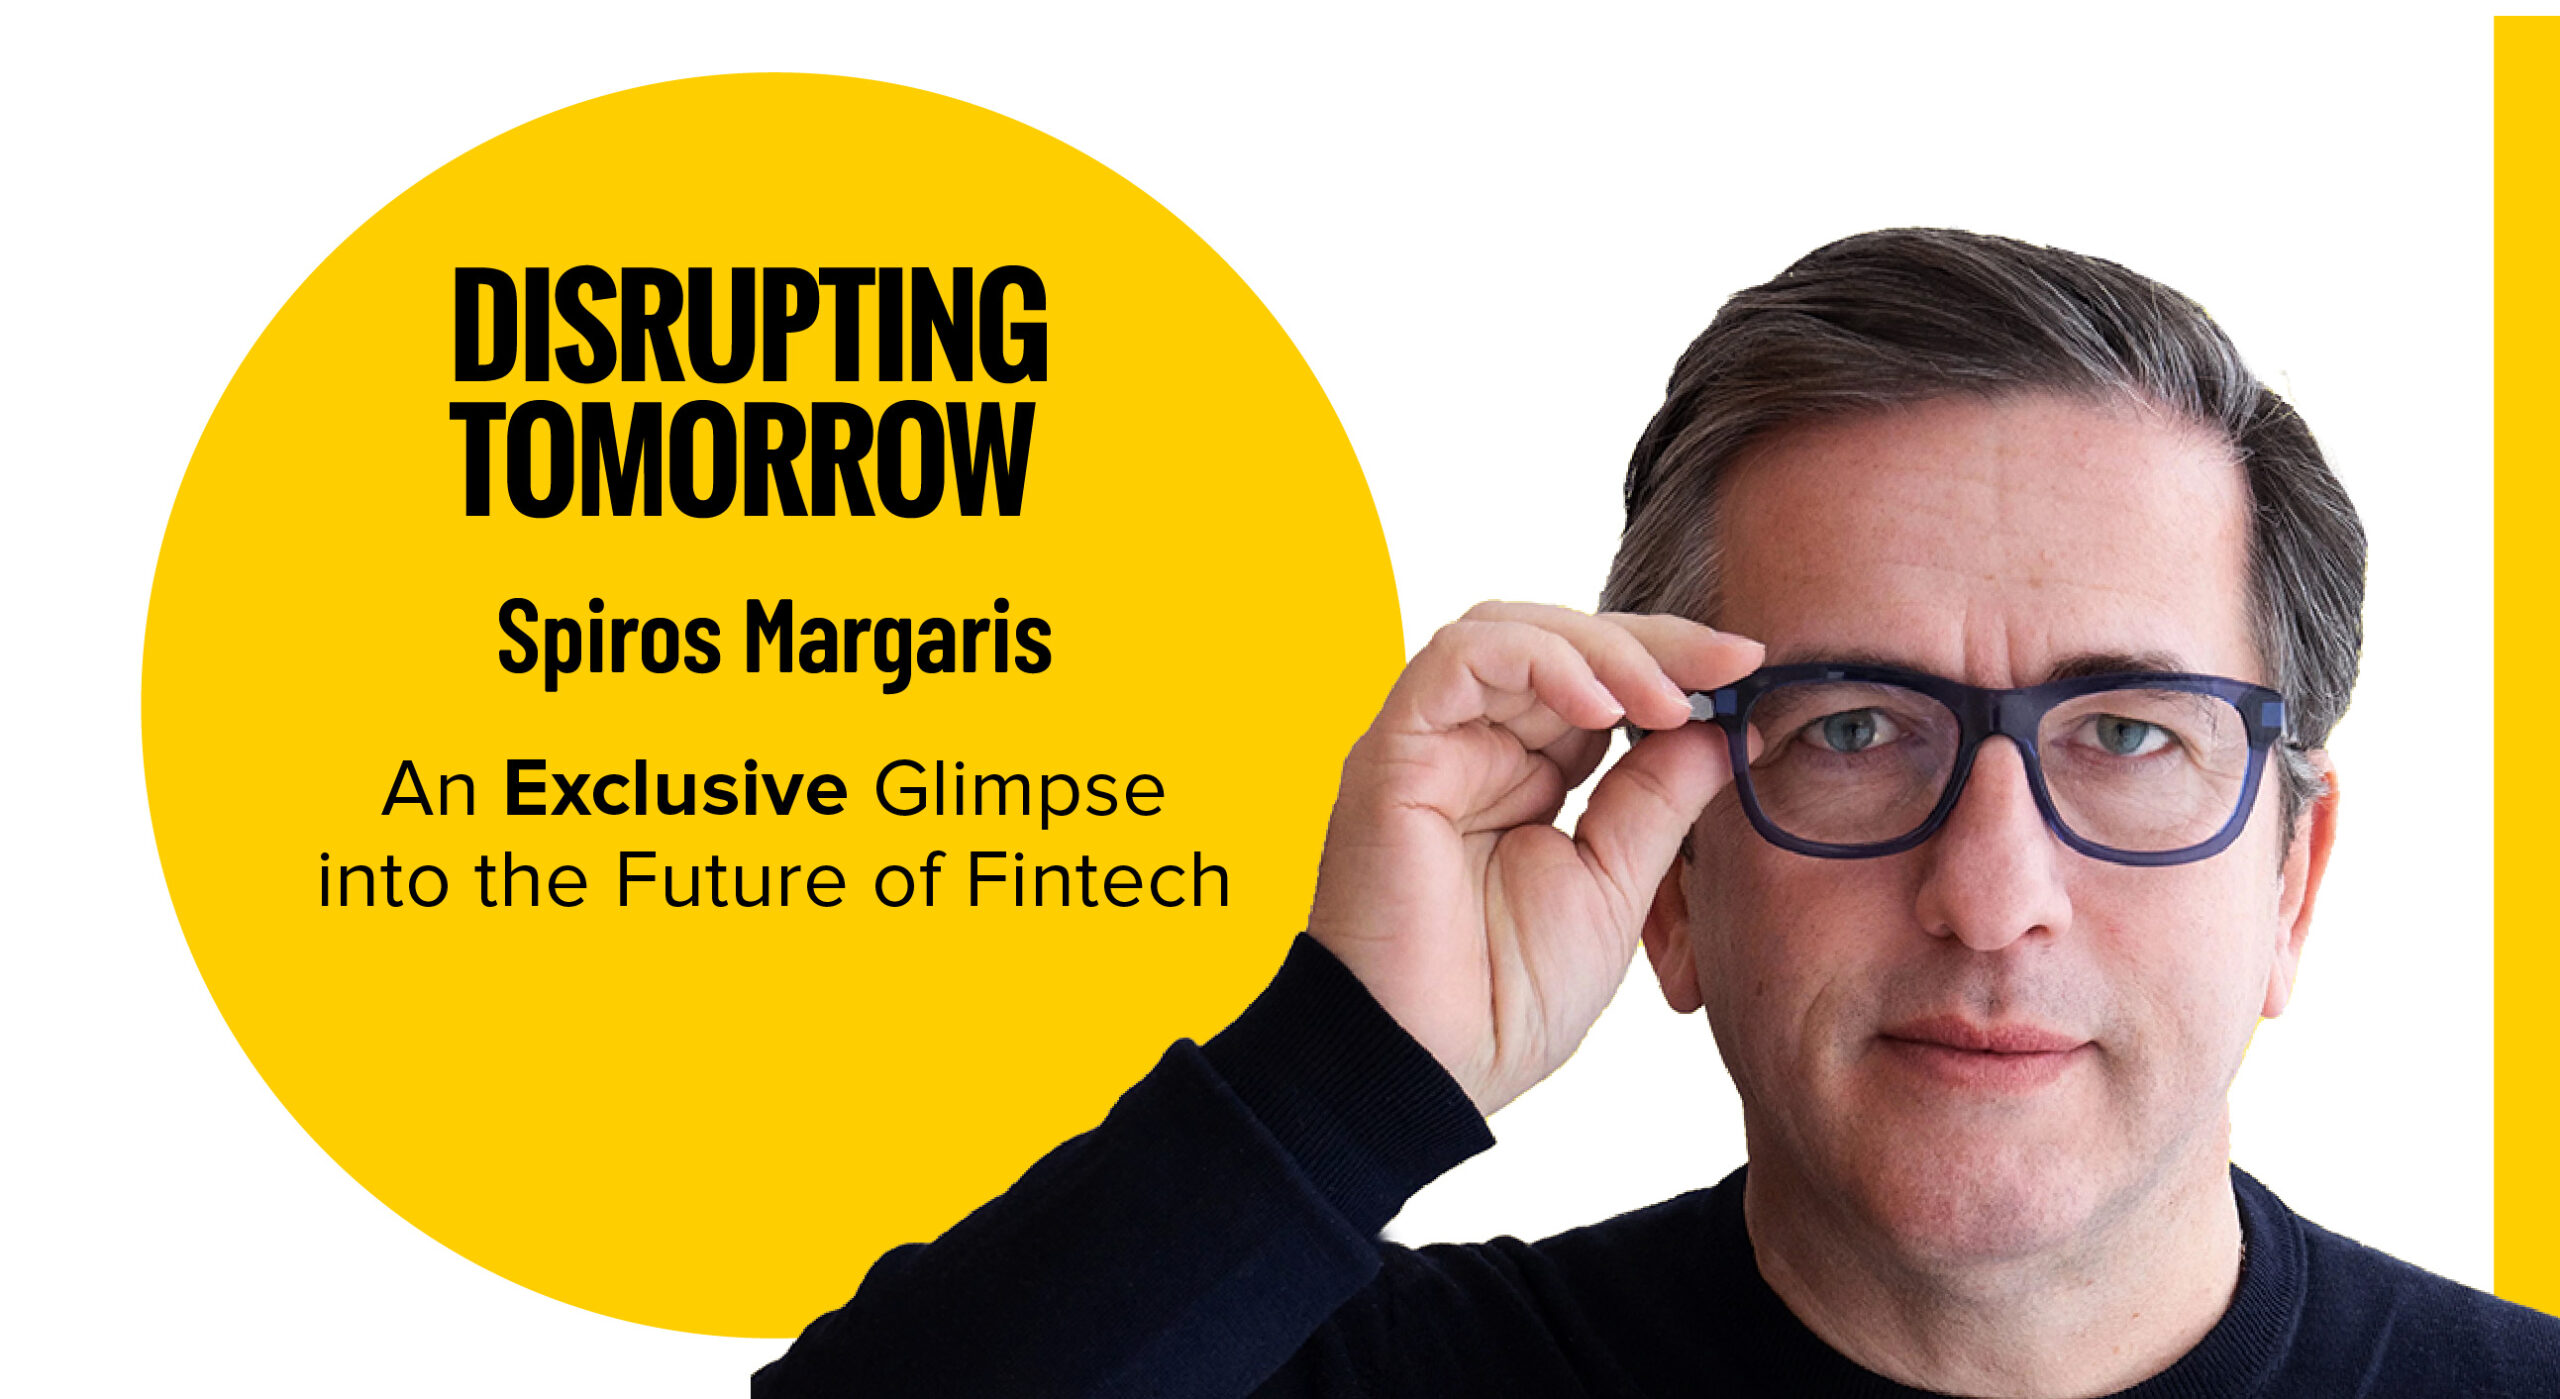 Disrupting Tomorrow with Spiros Margaris: An Exclusive Glimpse into the Future of Fintech